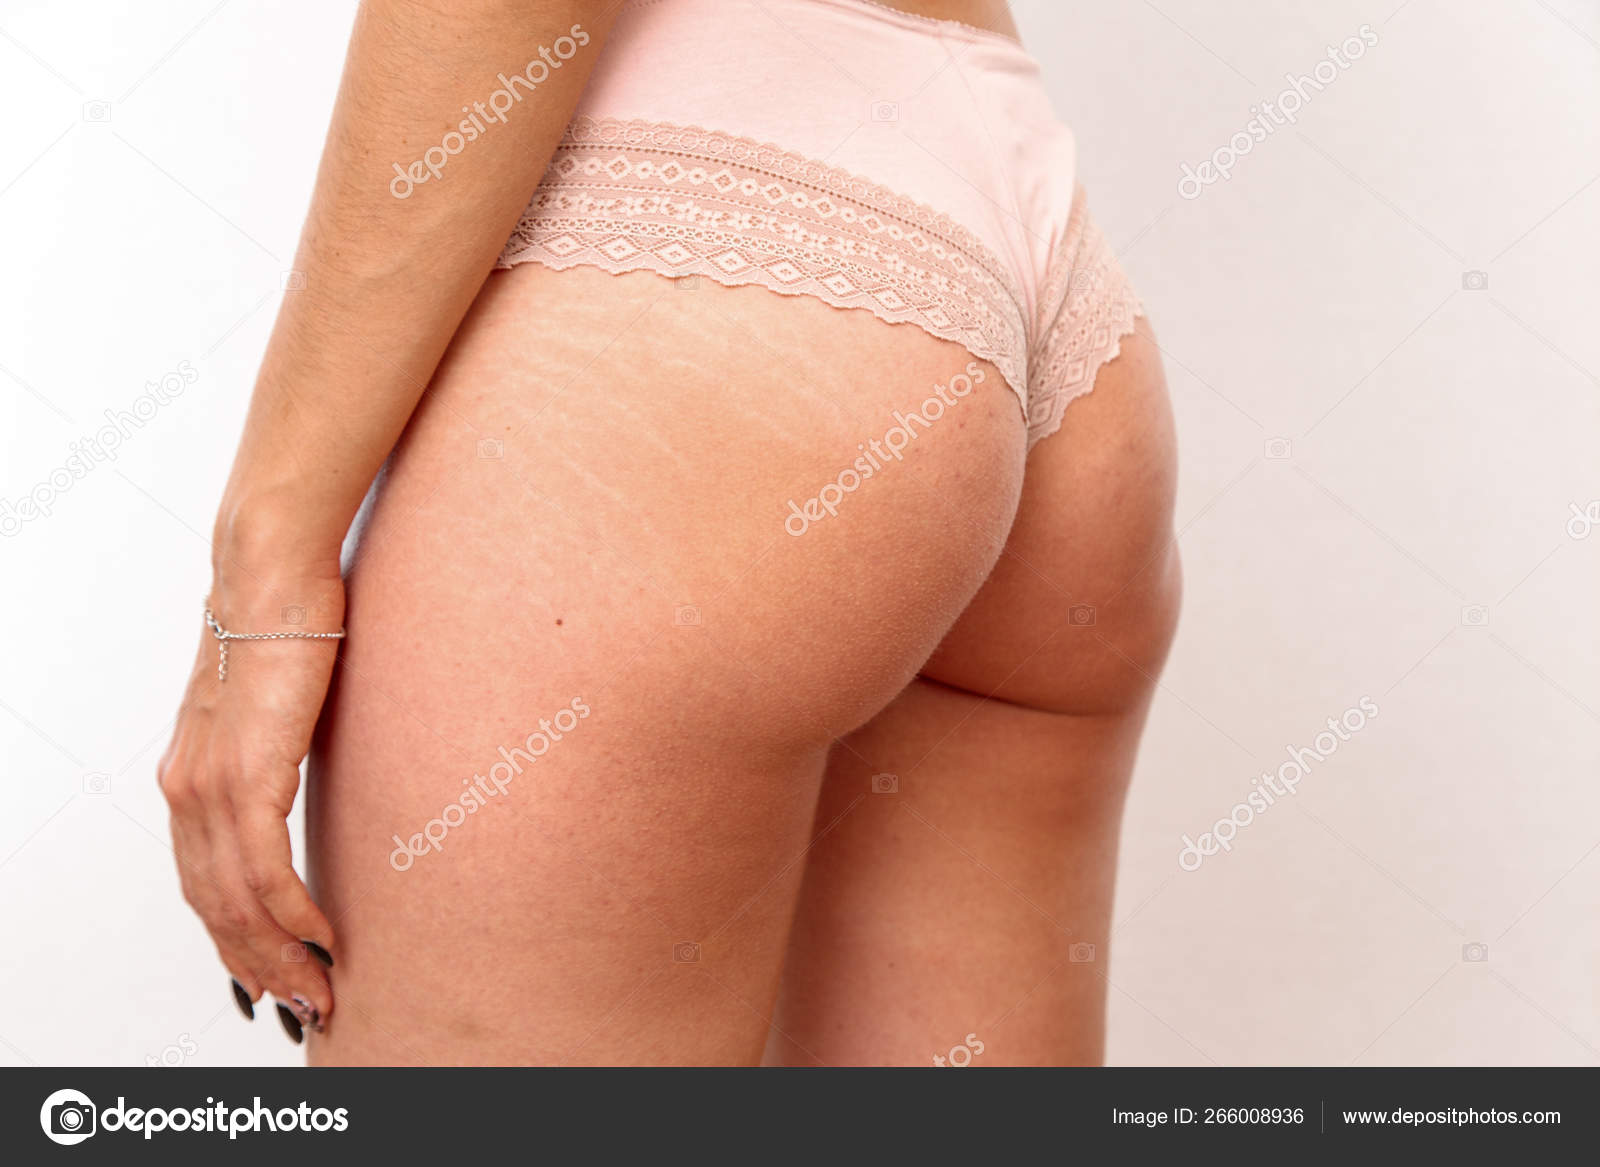 Stock photography ▻ Young woman shows her buttocks with cellulite and stret...